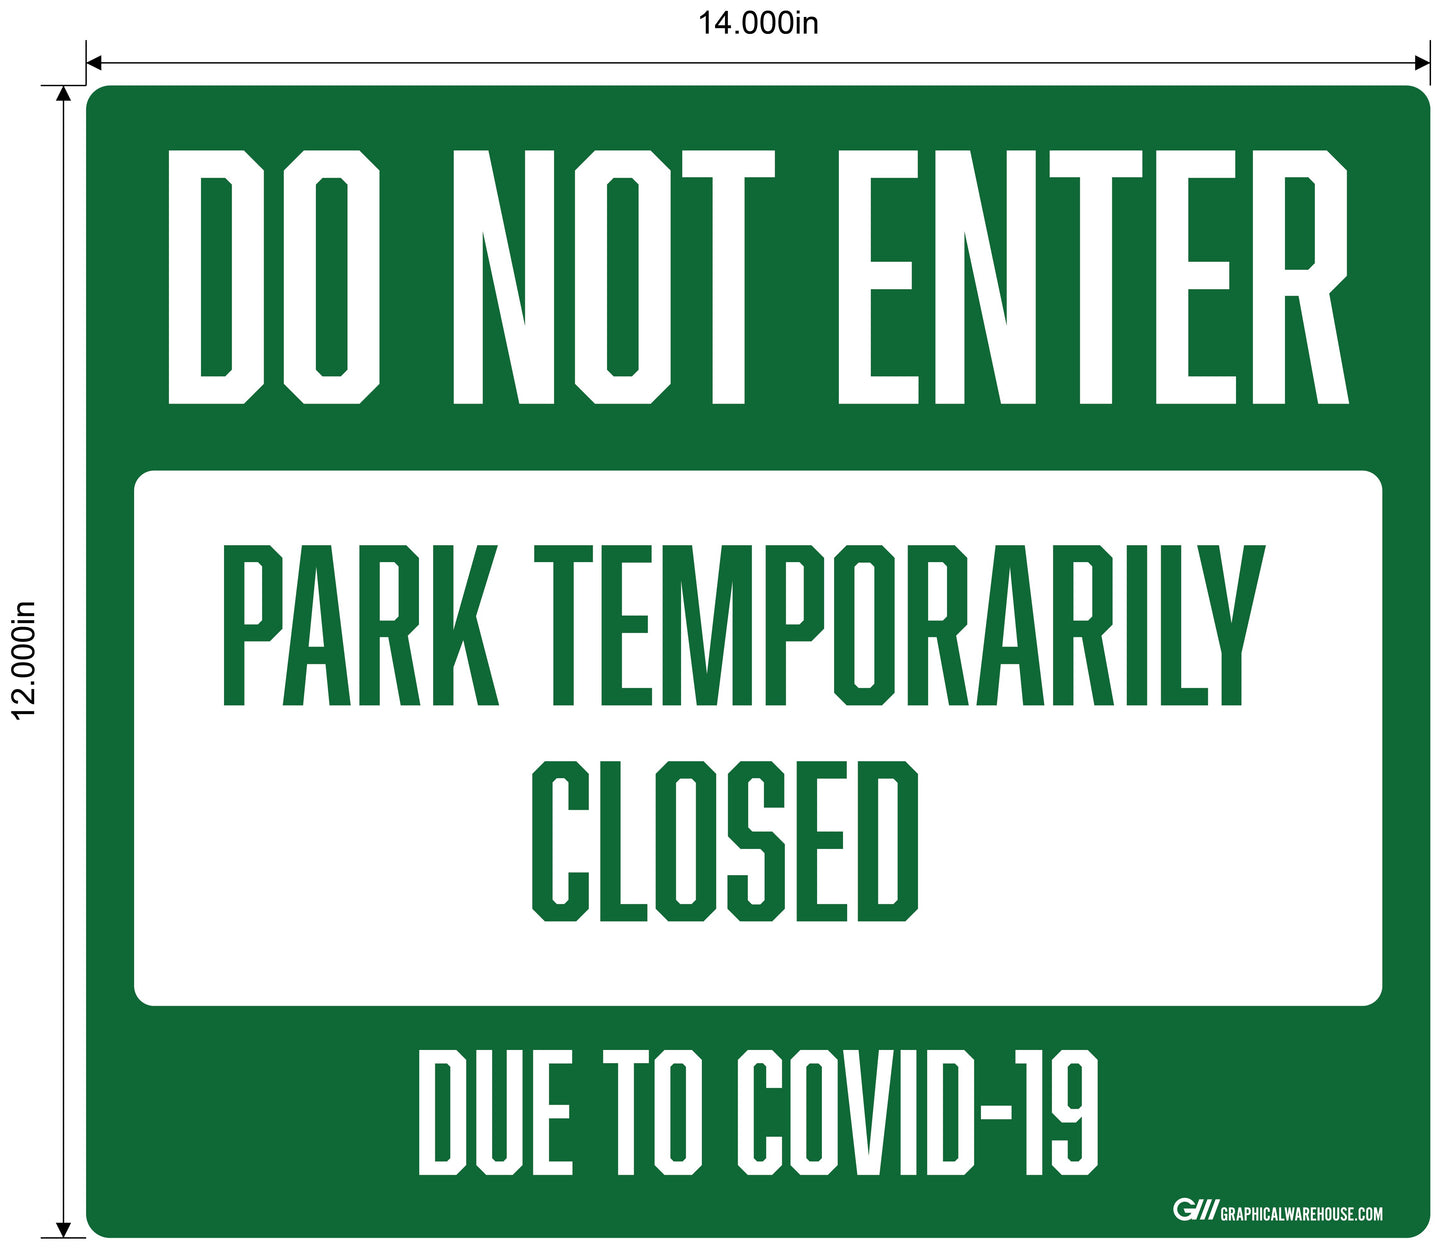 "Do Not Enter, Park Temporarily Closed Due To COVID-19" Adhesive Durable Vinyl Decal- Various Sizes Available